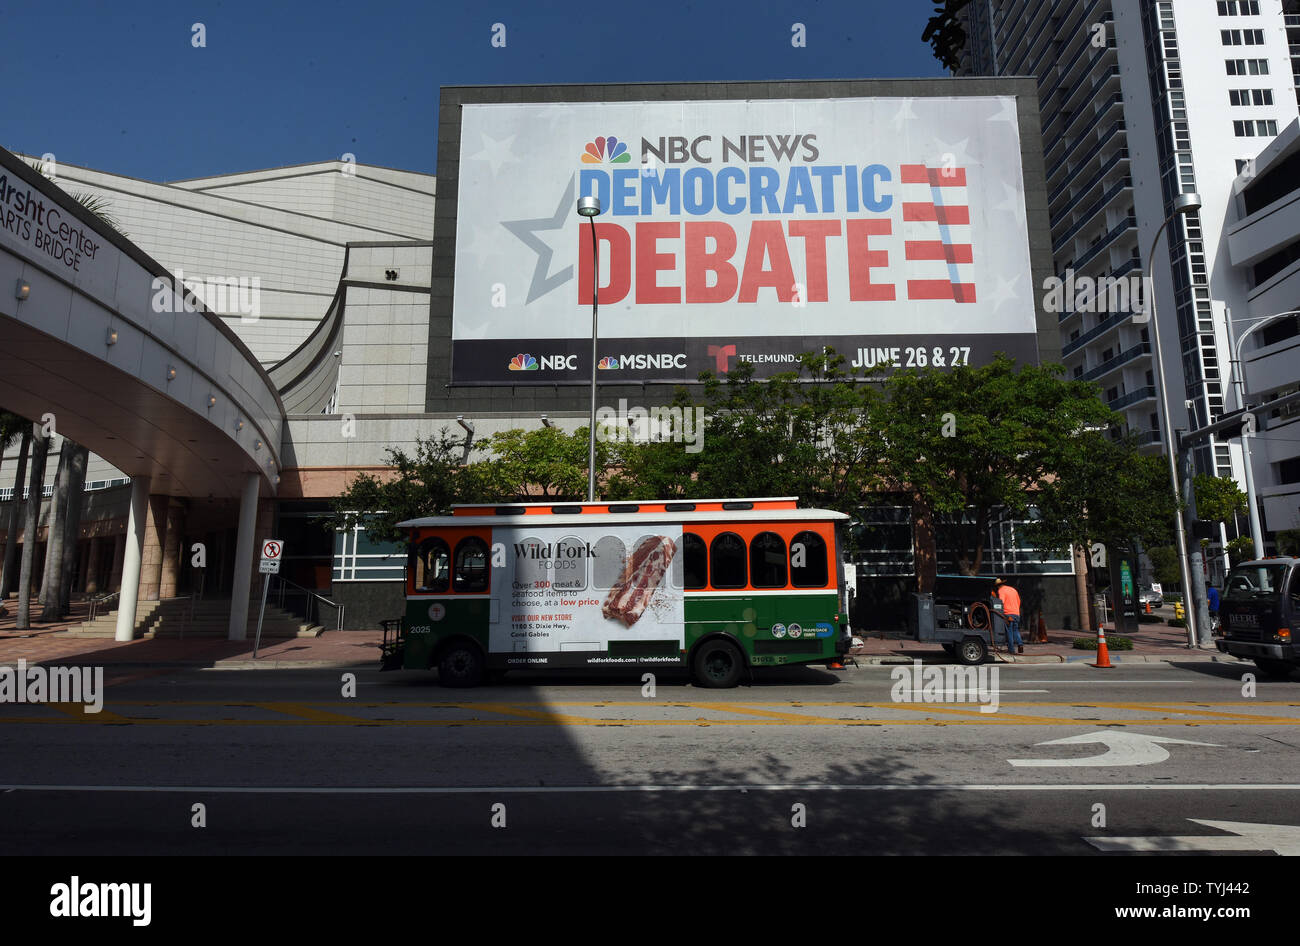 Miami, Florida, USA. 26th Jun 2019. A trolley drives past a billboard outside the Adrienne Arsht Center for the Performing Arts advertising the first Democratic presidential primary debates for the 2020 elections which will be held on June 26 and 27 in Miami, Florida. (Paul Hennessy/Alamy) Credit: Paul Hennessy/Alamy Live News Stock Photo